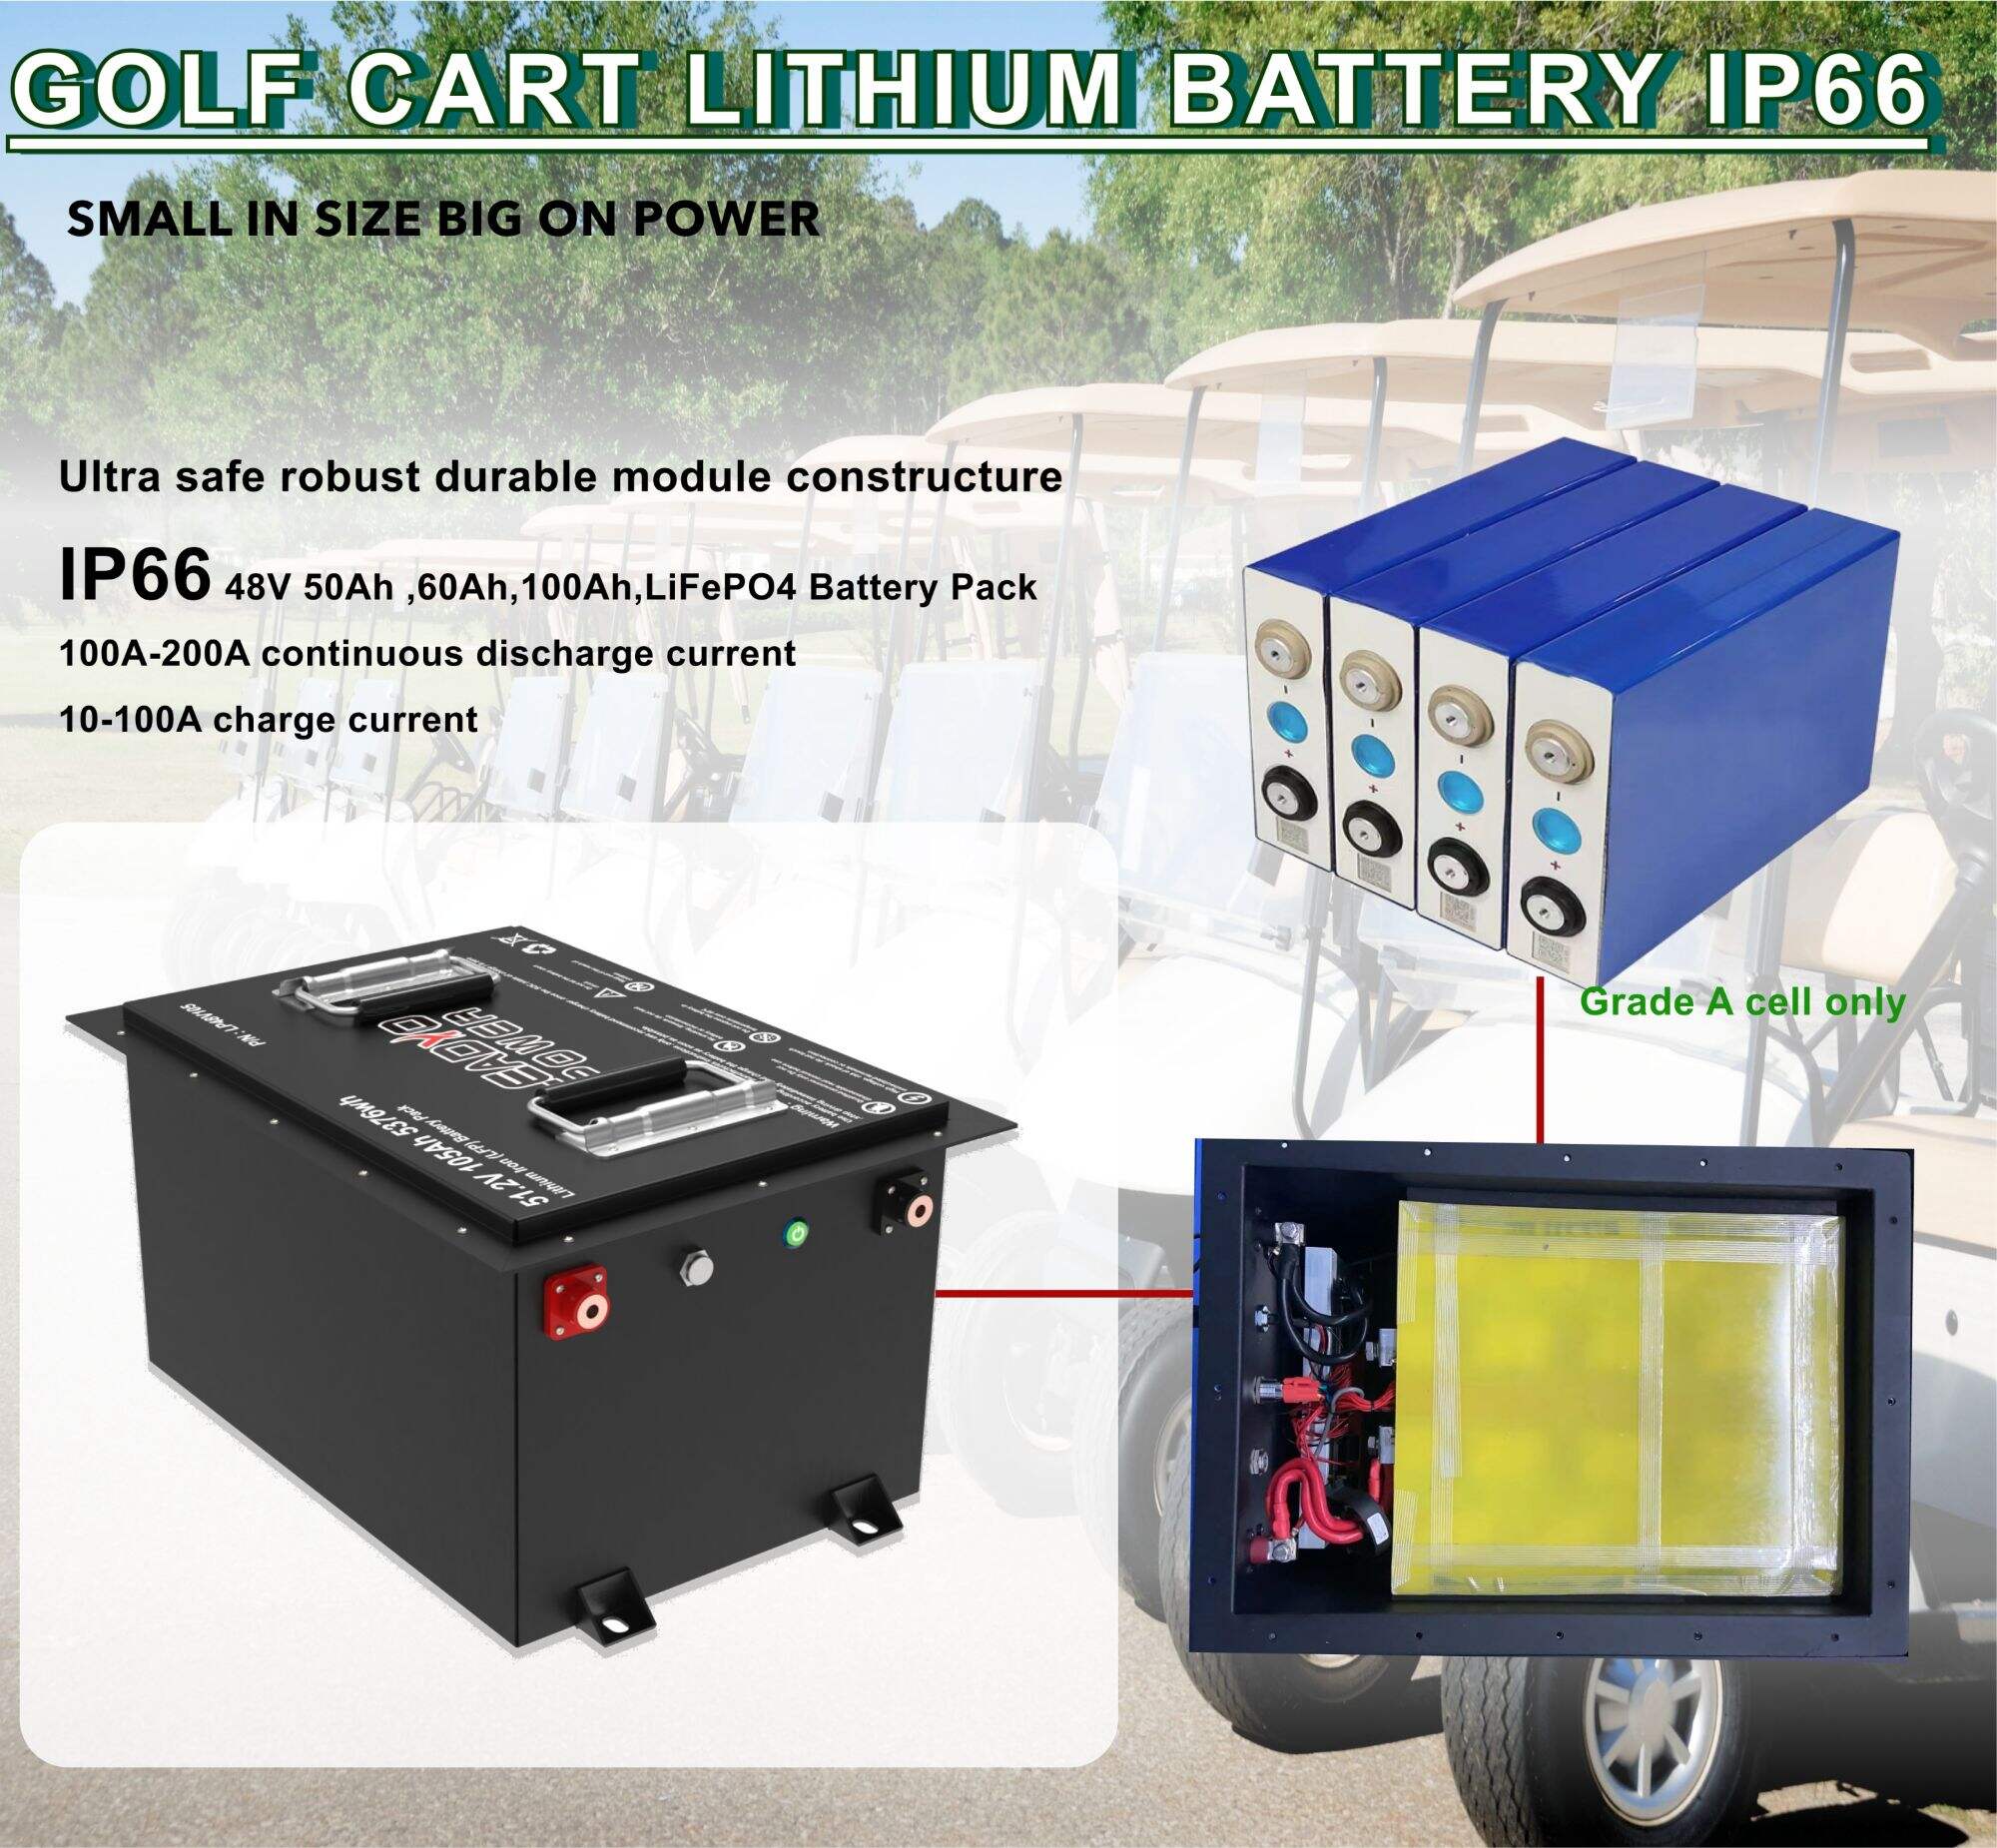 About The Golf Cart Lithium Batteries